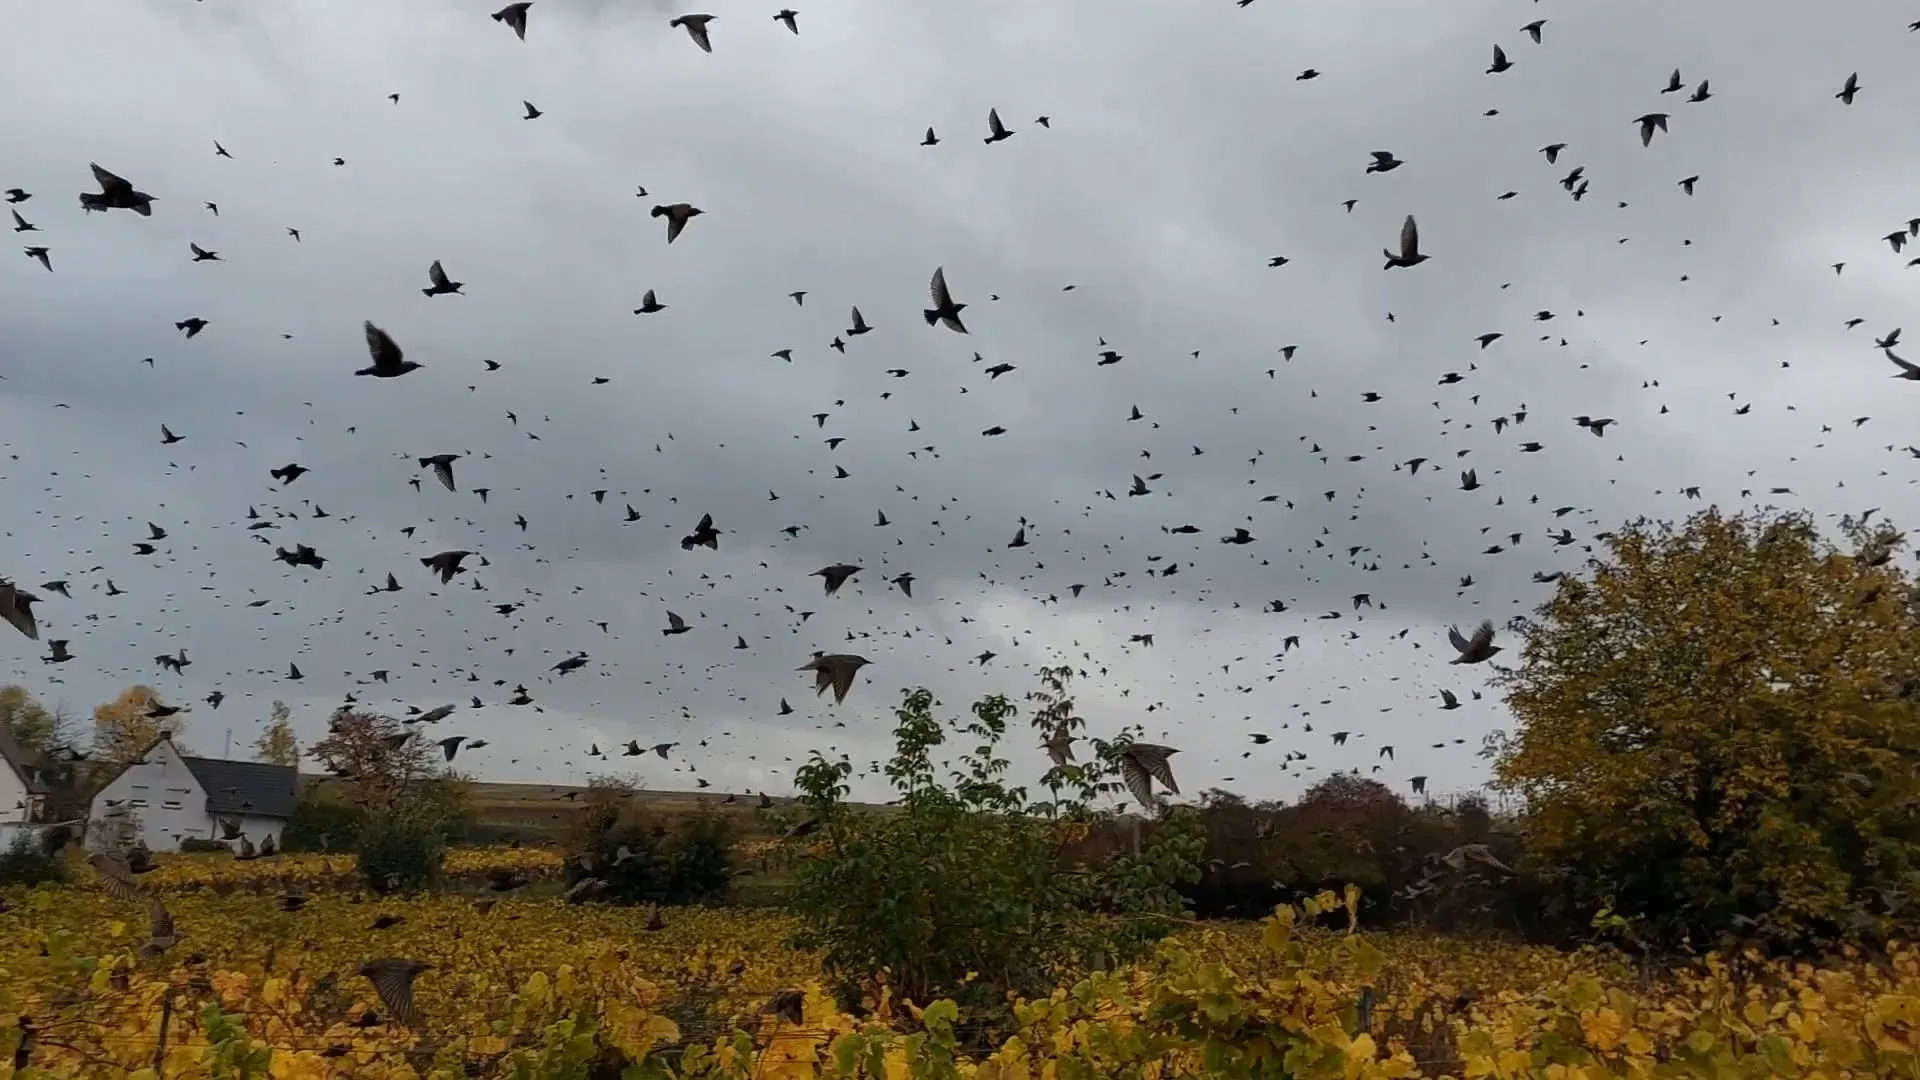 Huge flocks of birds in the Southern Palatinate: images straight out of Hitchcock's 